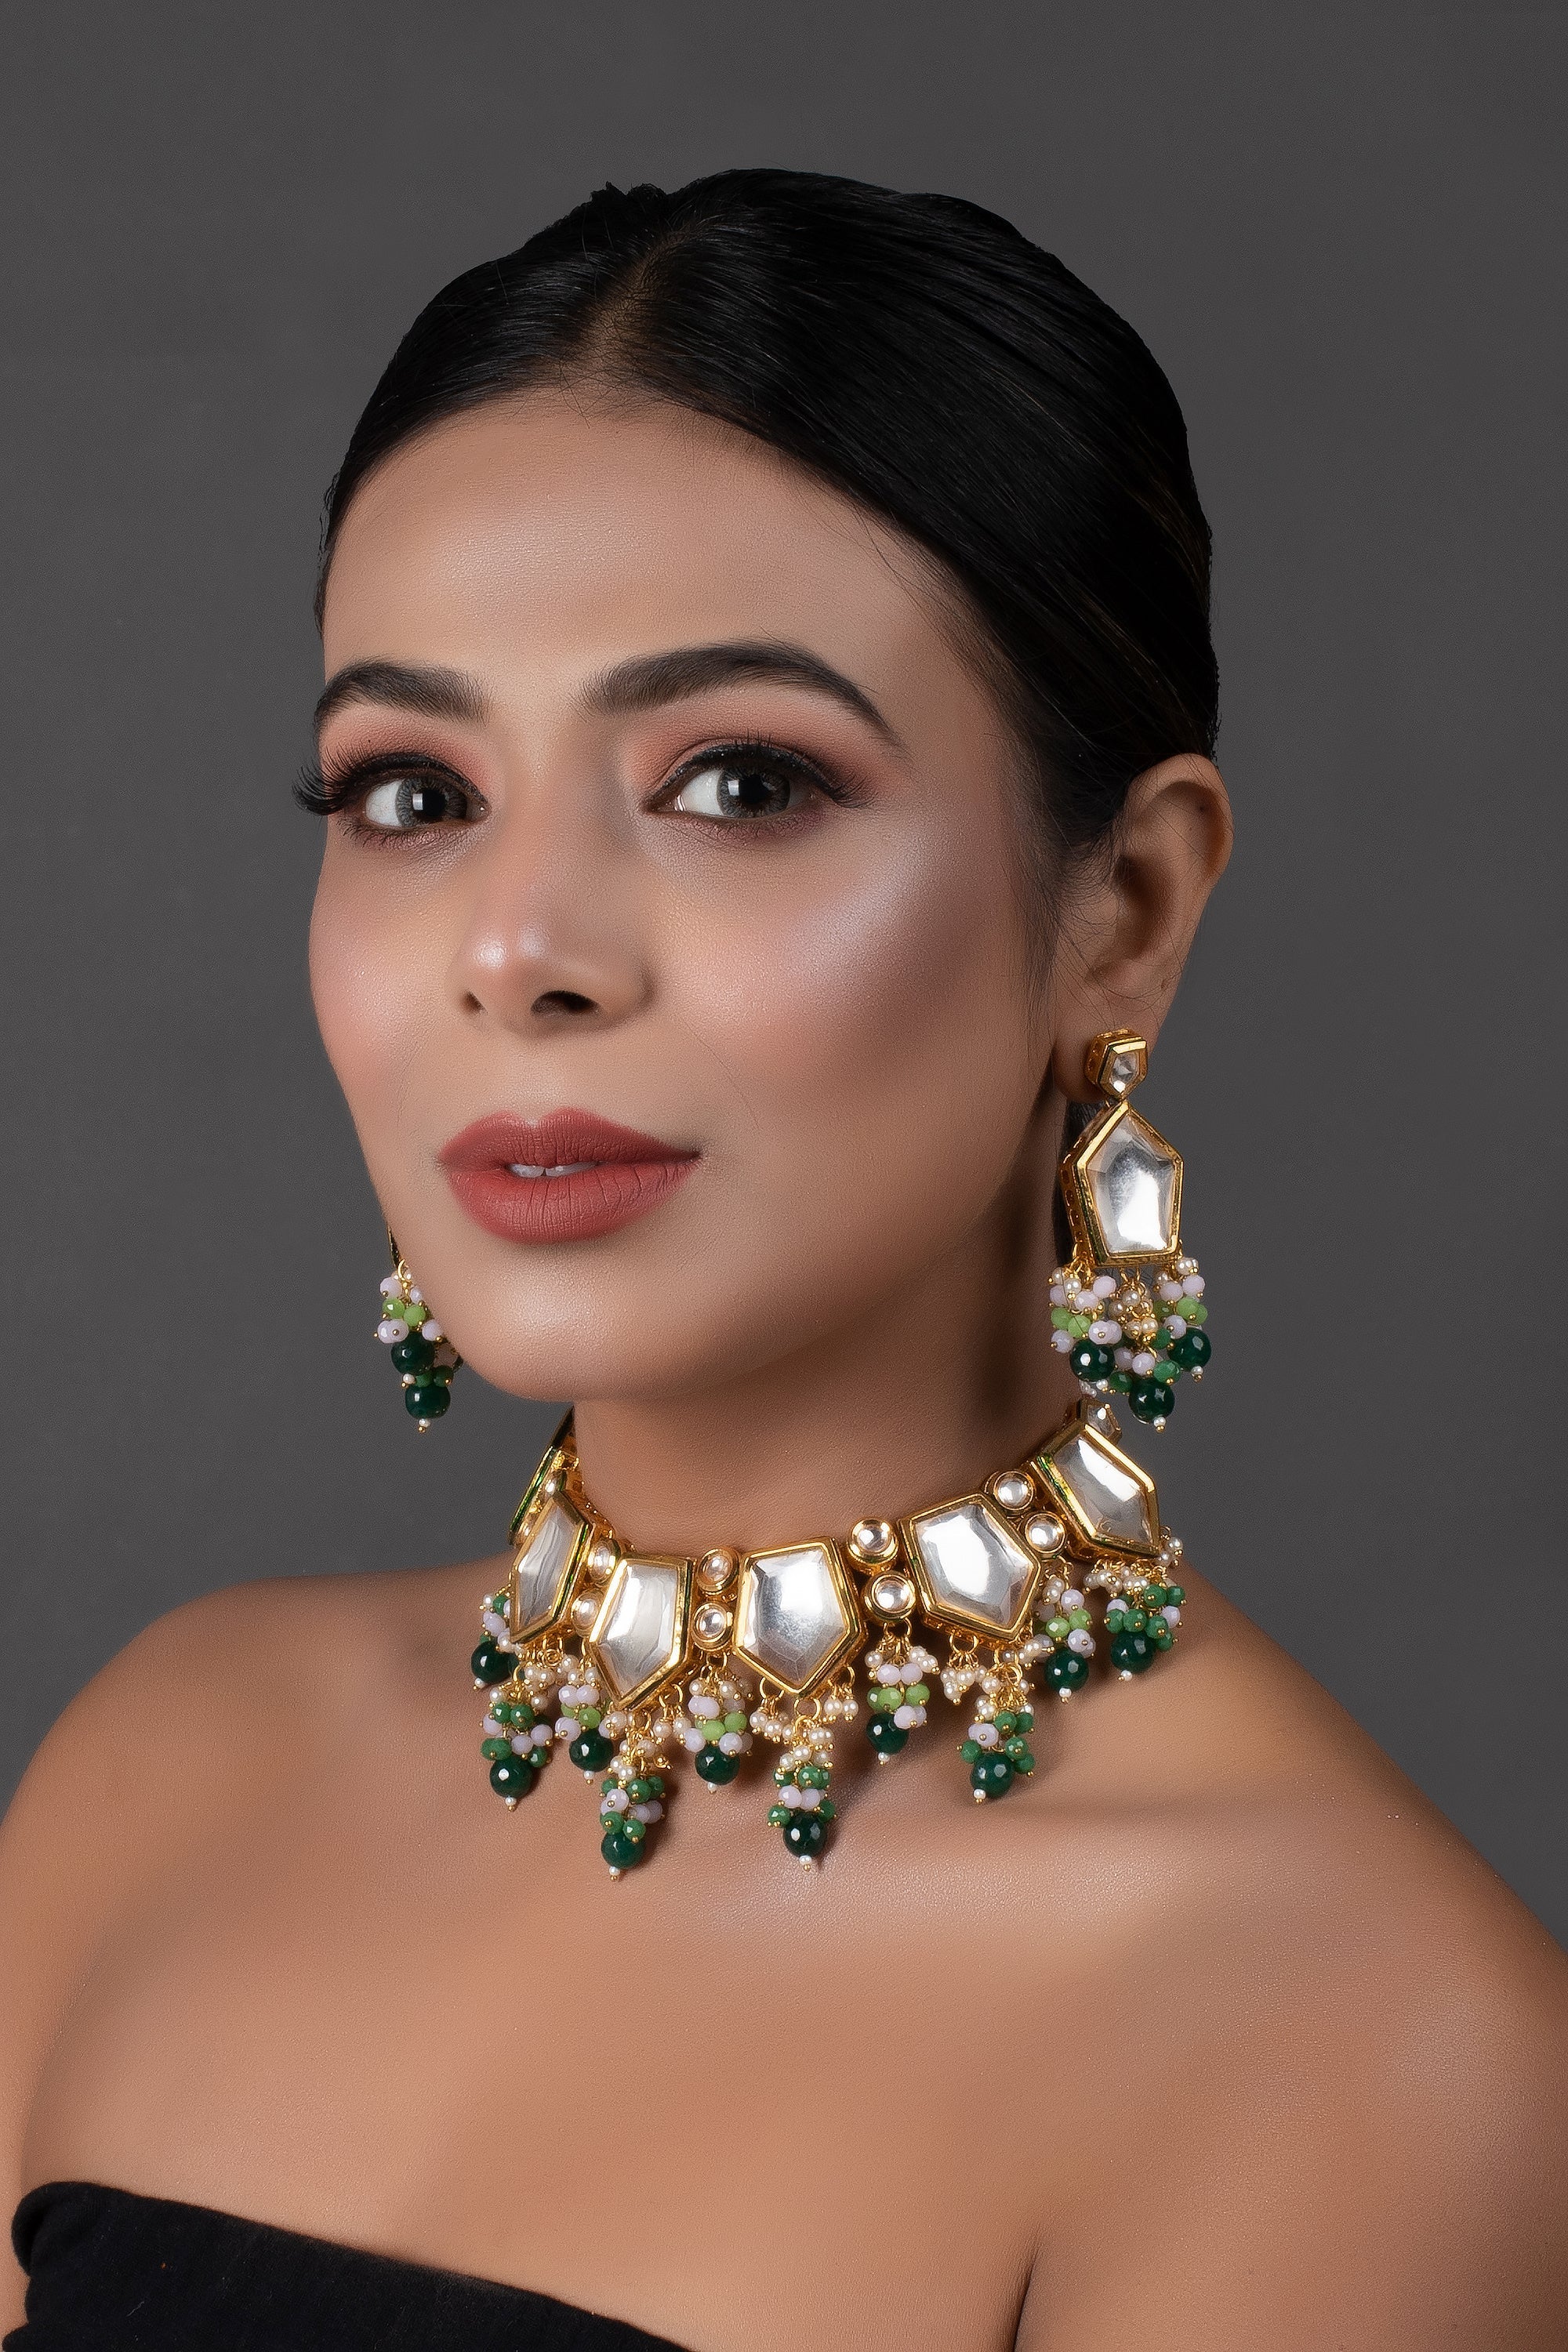 Green Gold toned Handcrafted Kundan necklace set